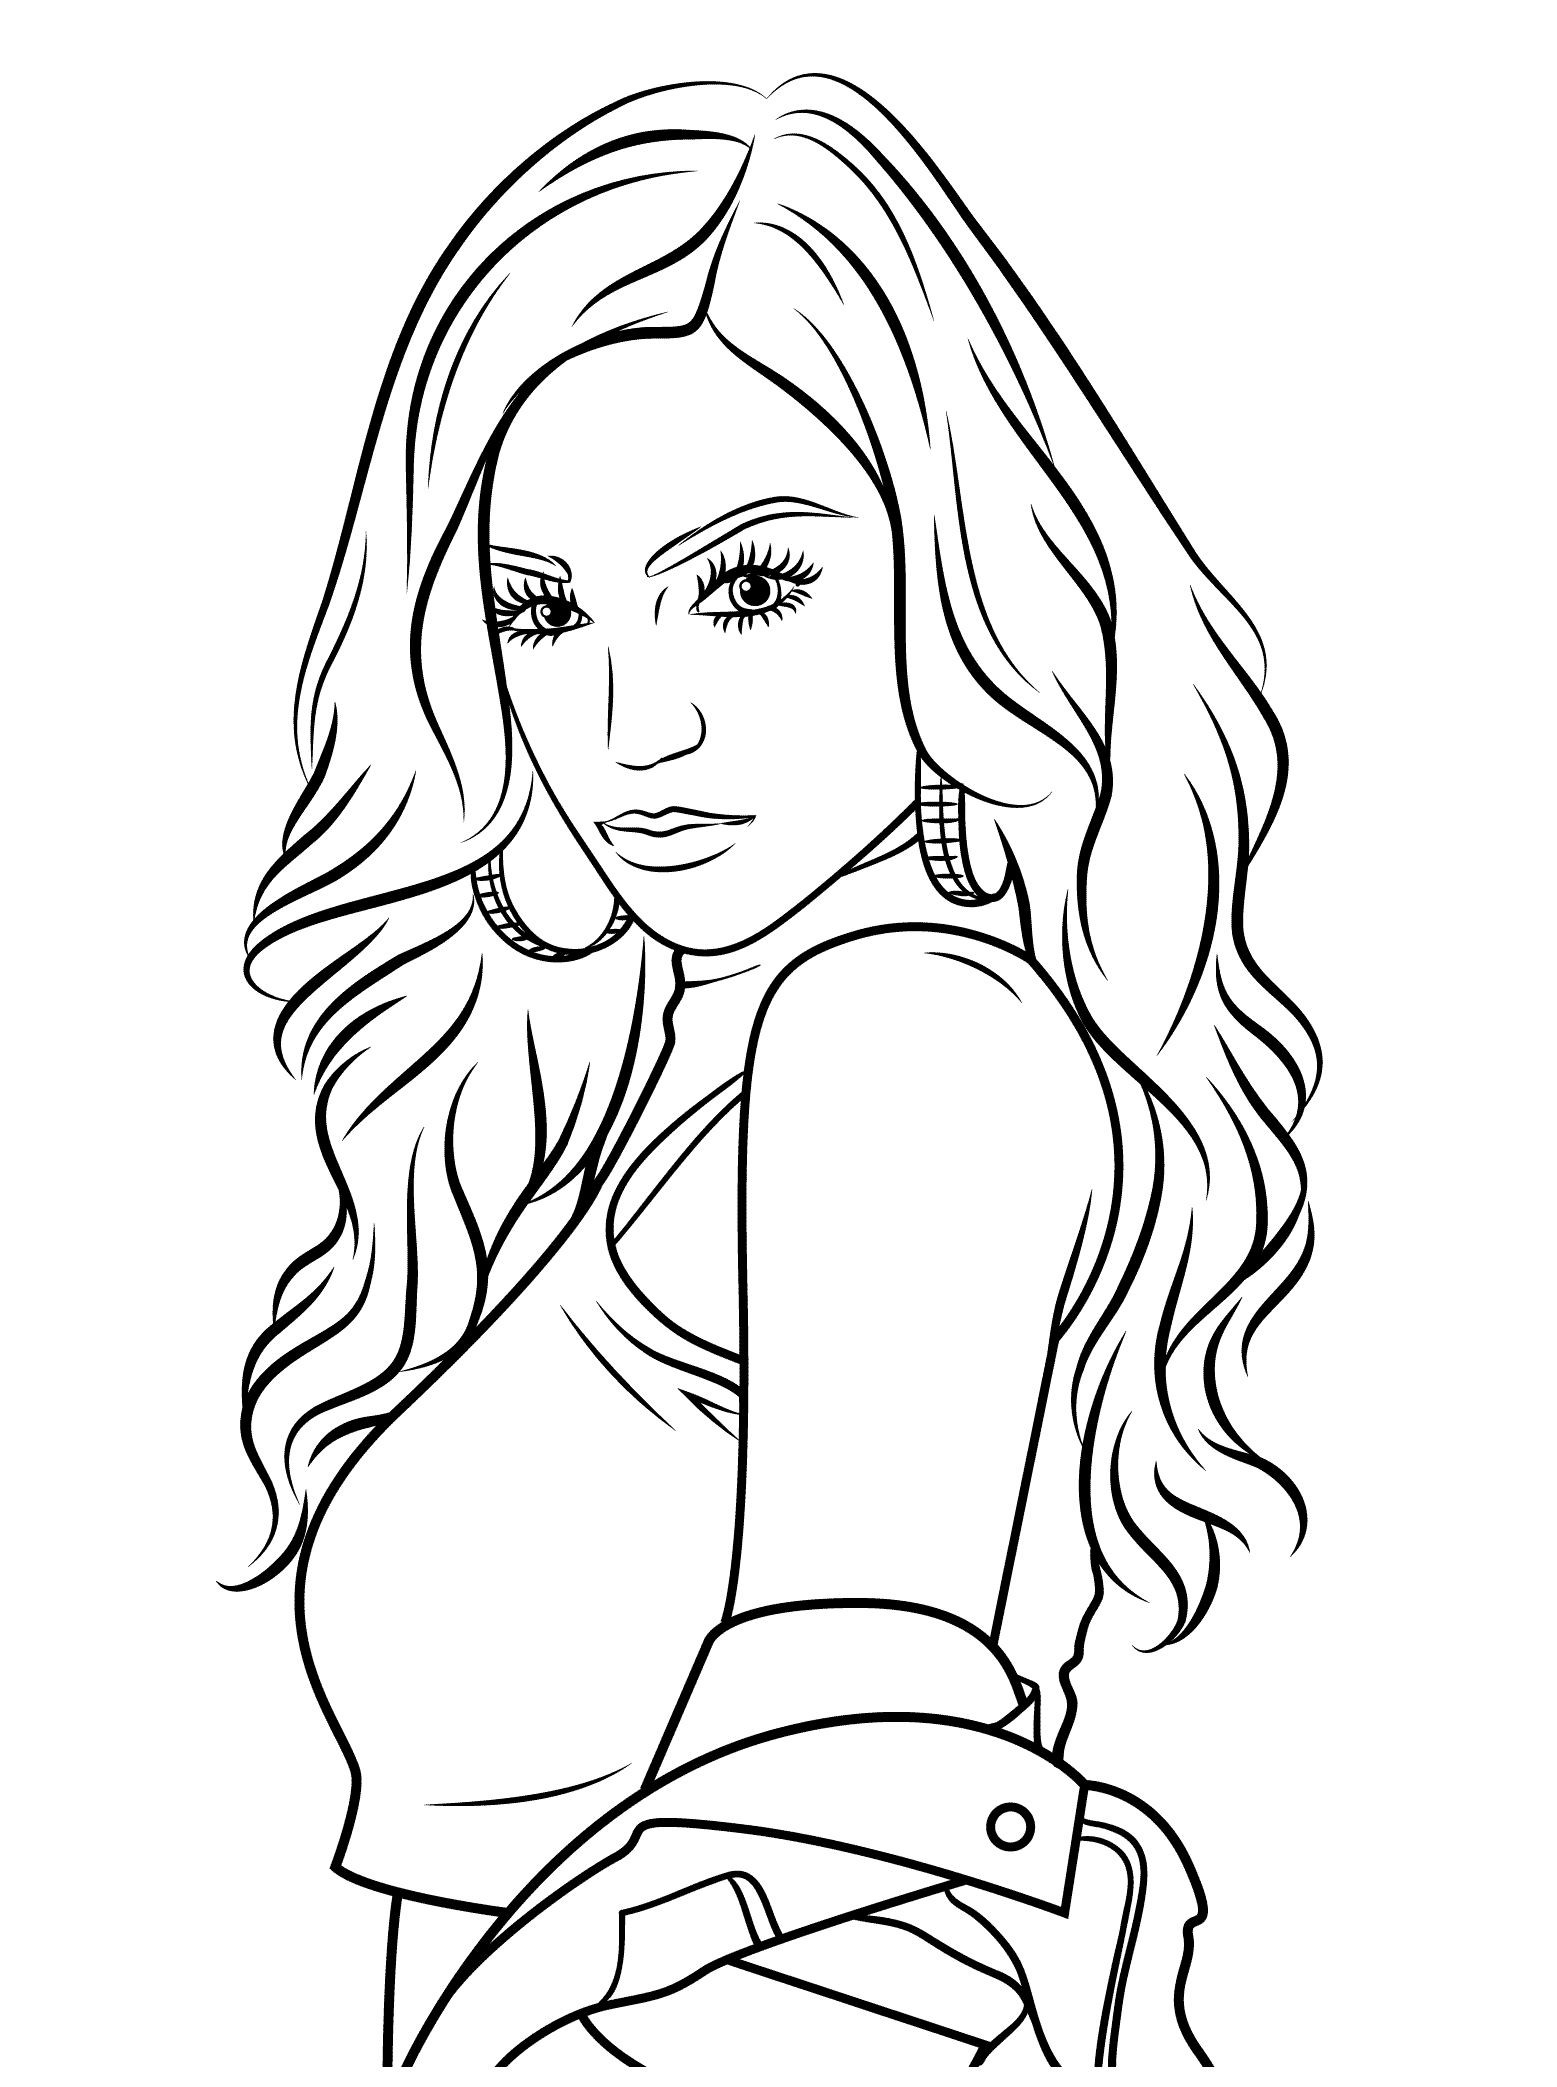 Jane Coloring Page